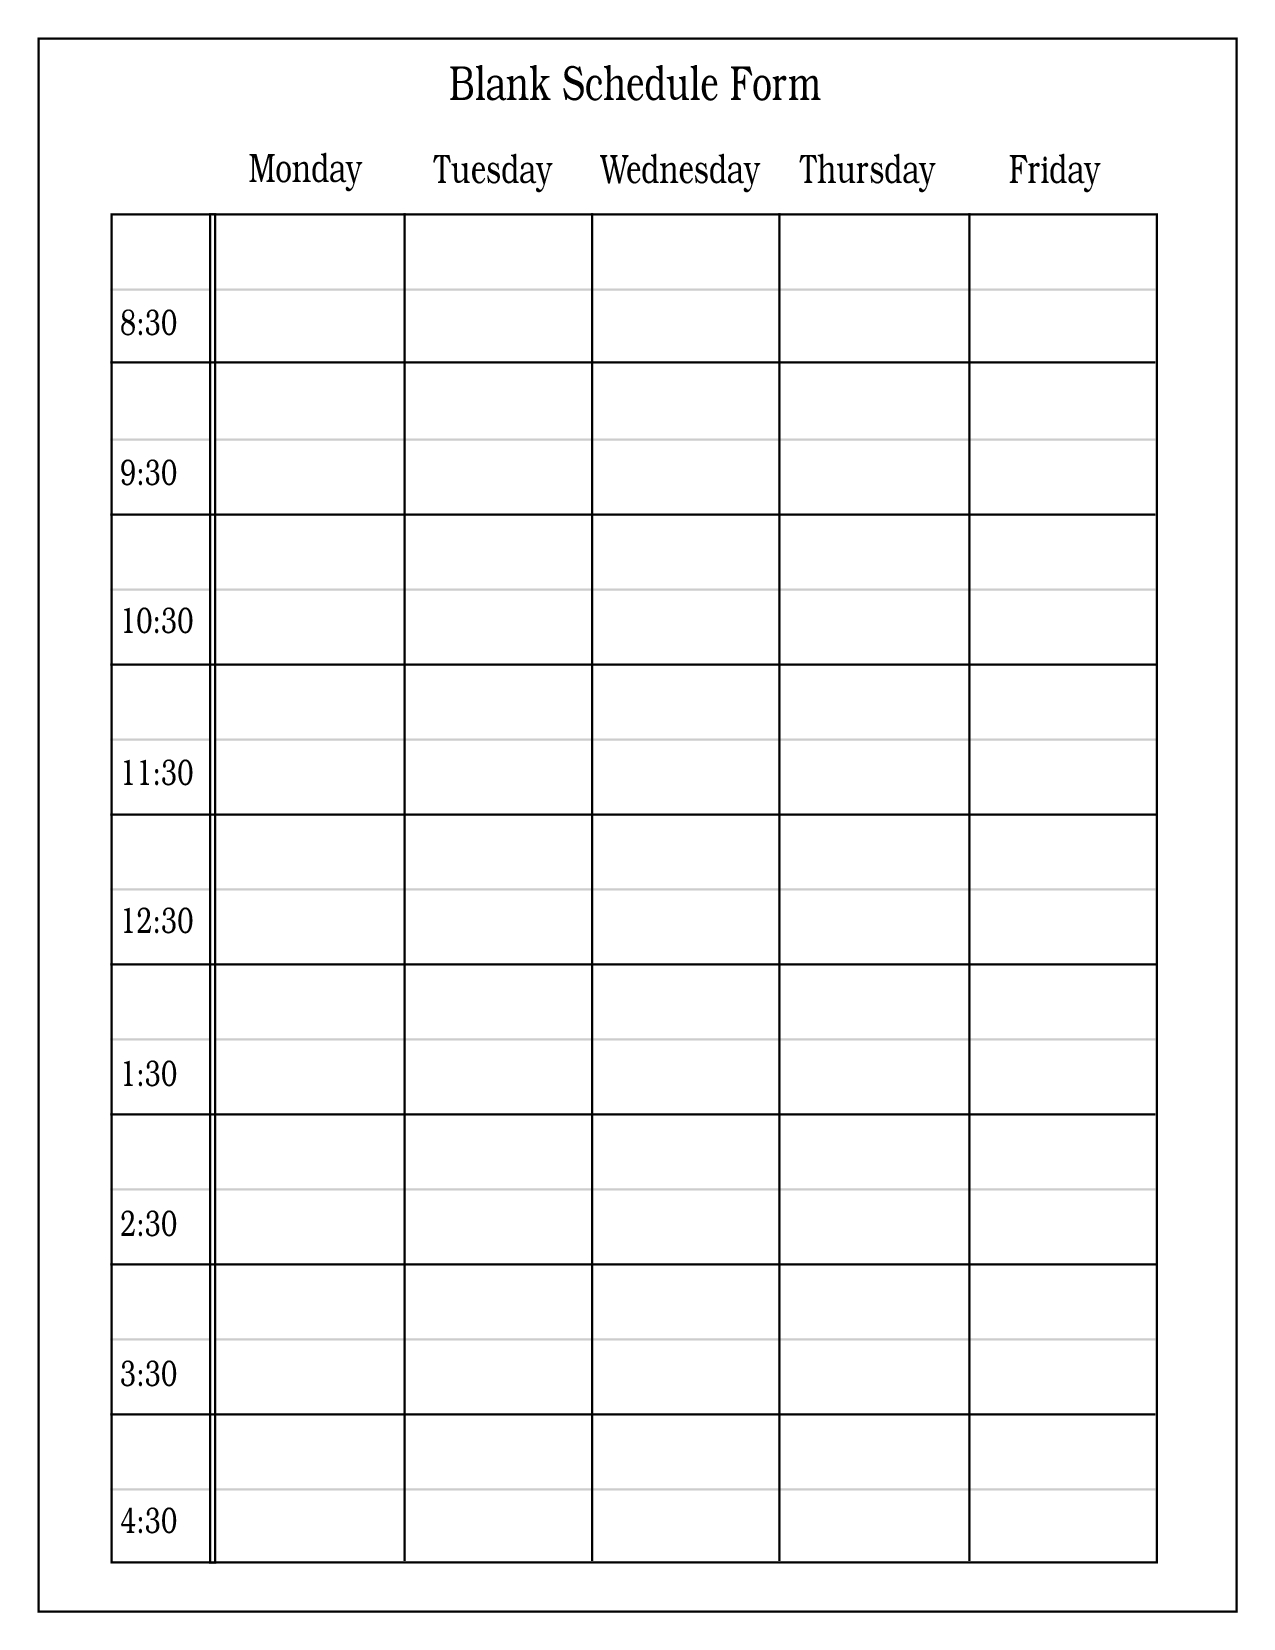 Free+Blank+Daily+Schedule+Form | Daily Schedule Template-Blank Time Slot Week Schedules